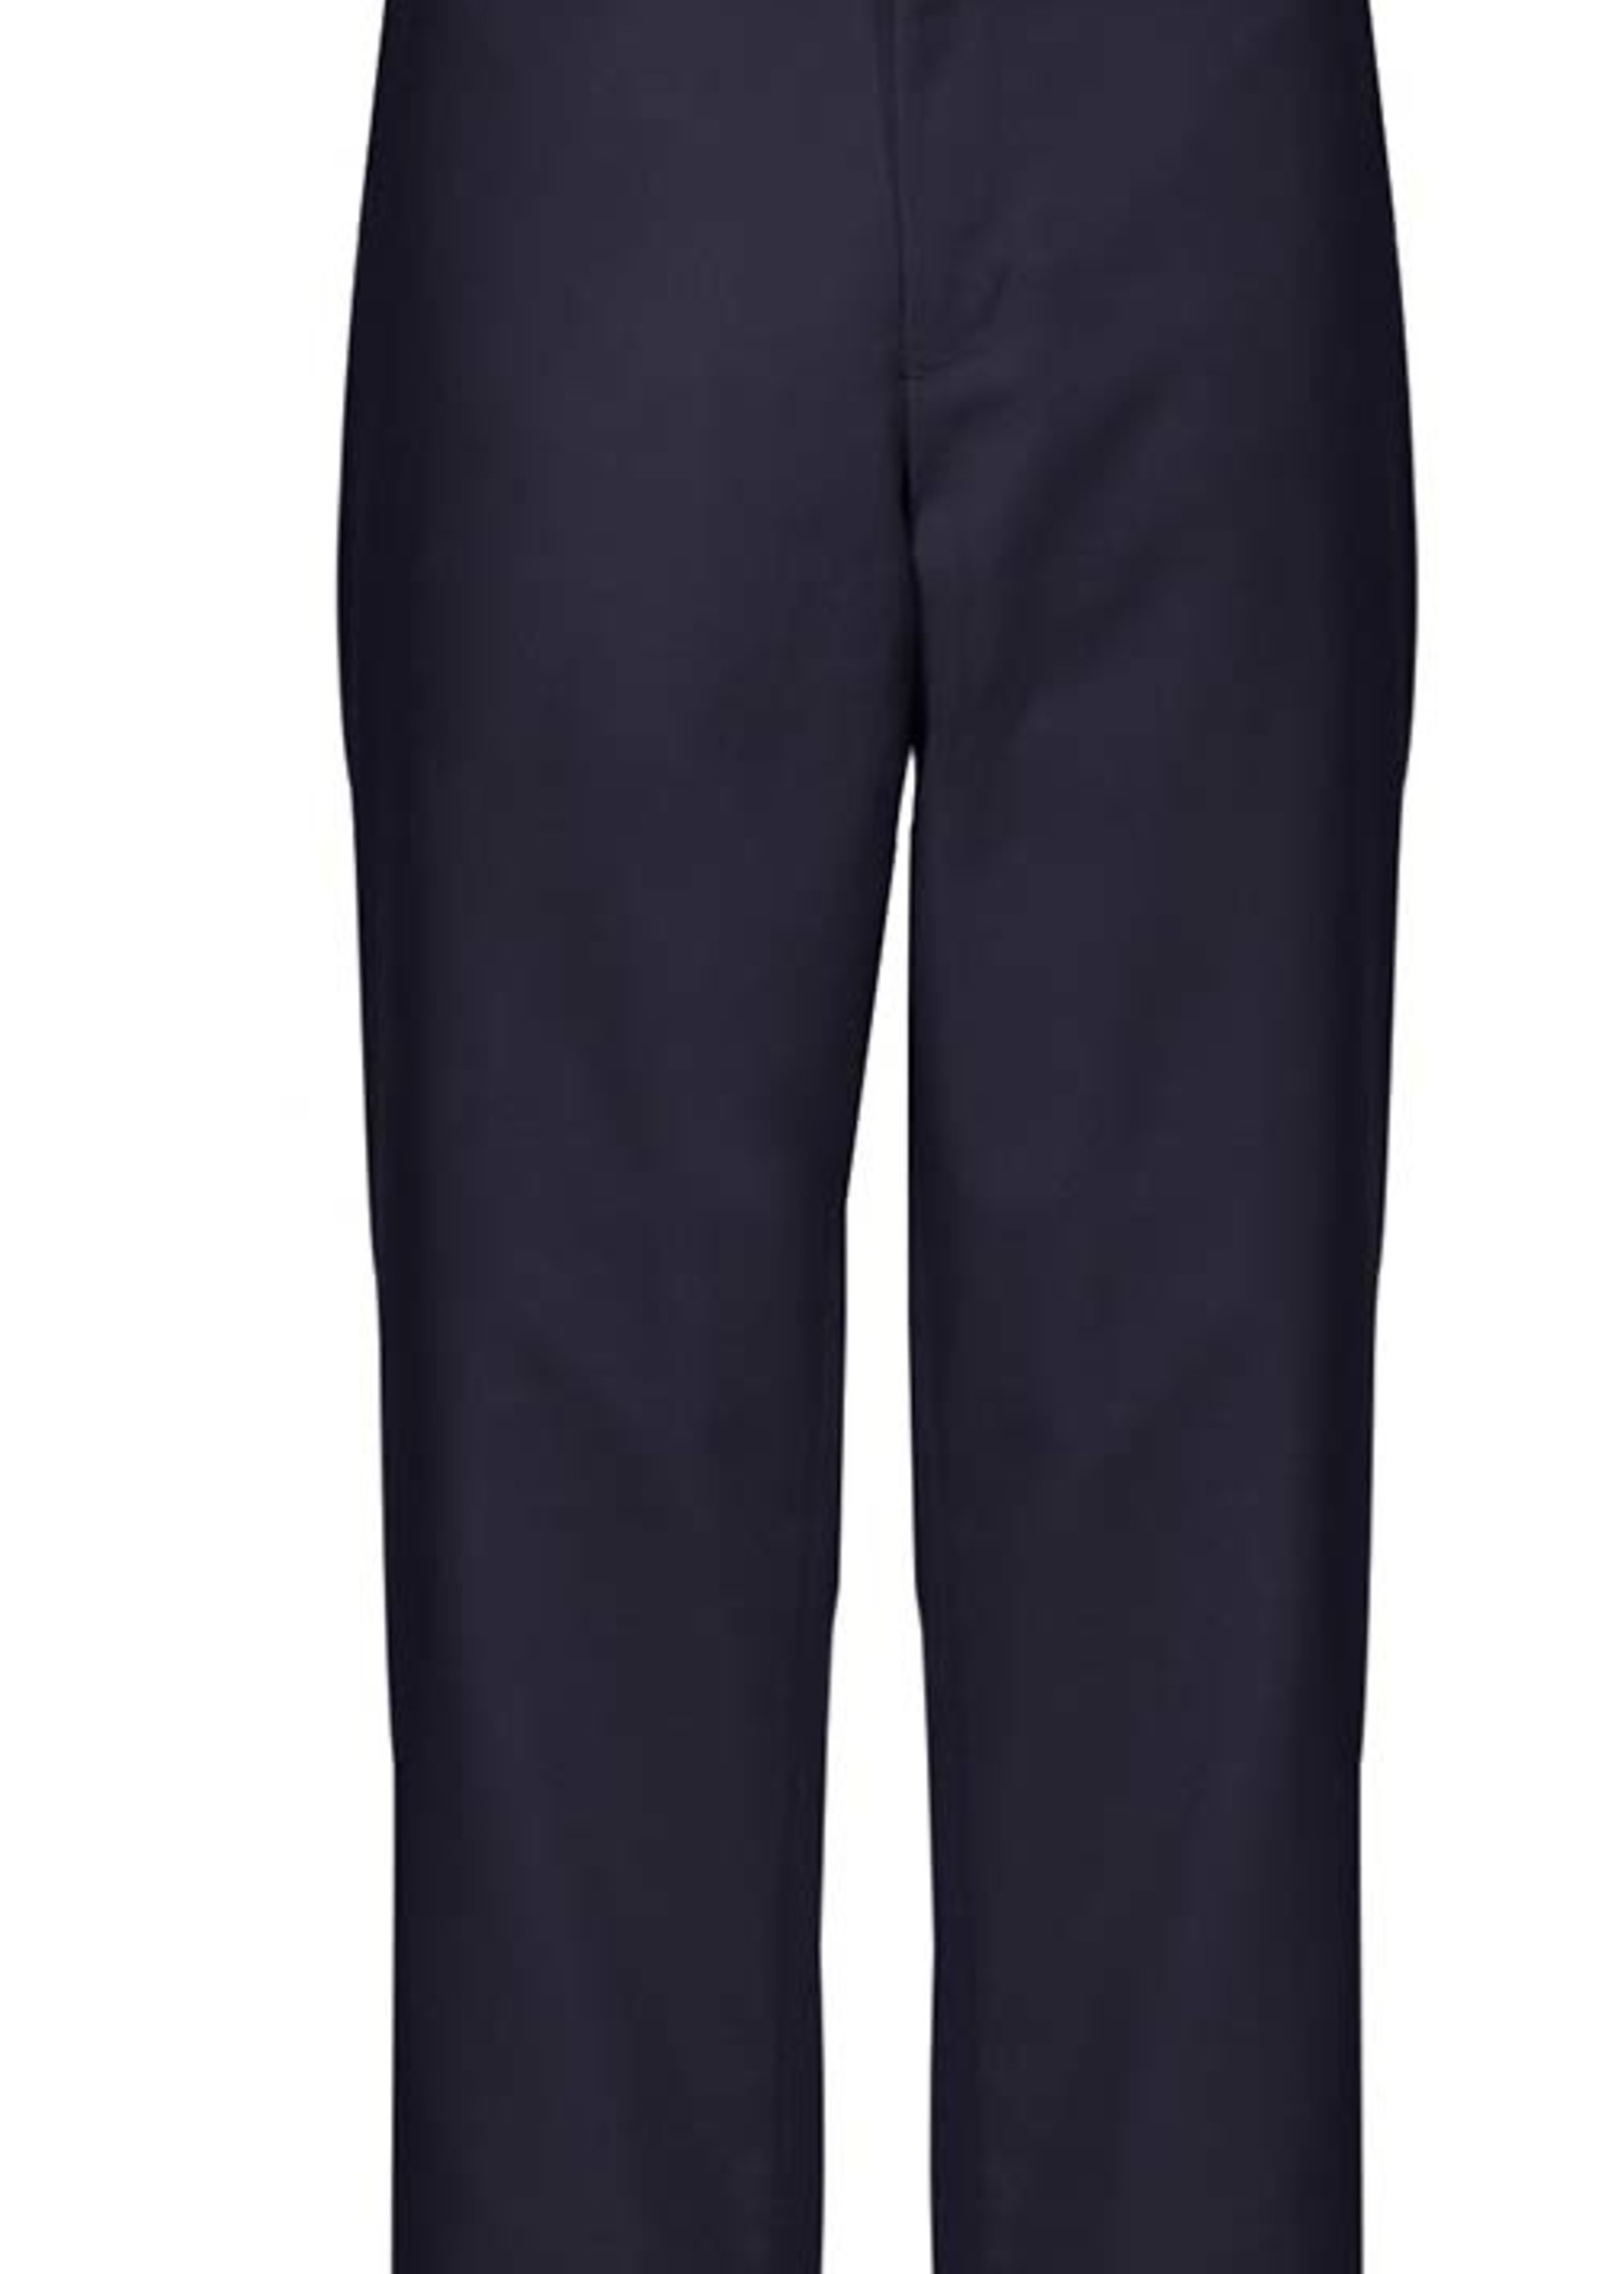 Mens Navy Flat Front Pants  with logo